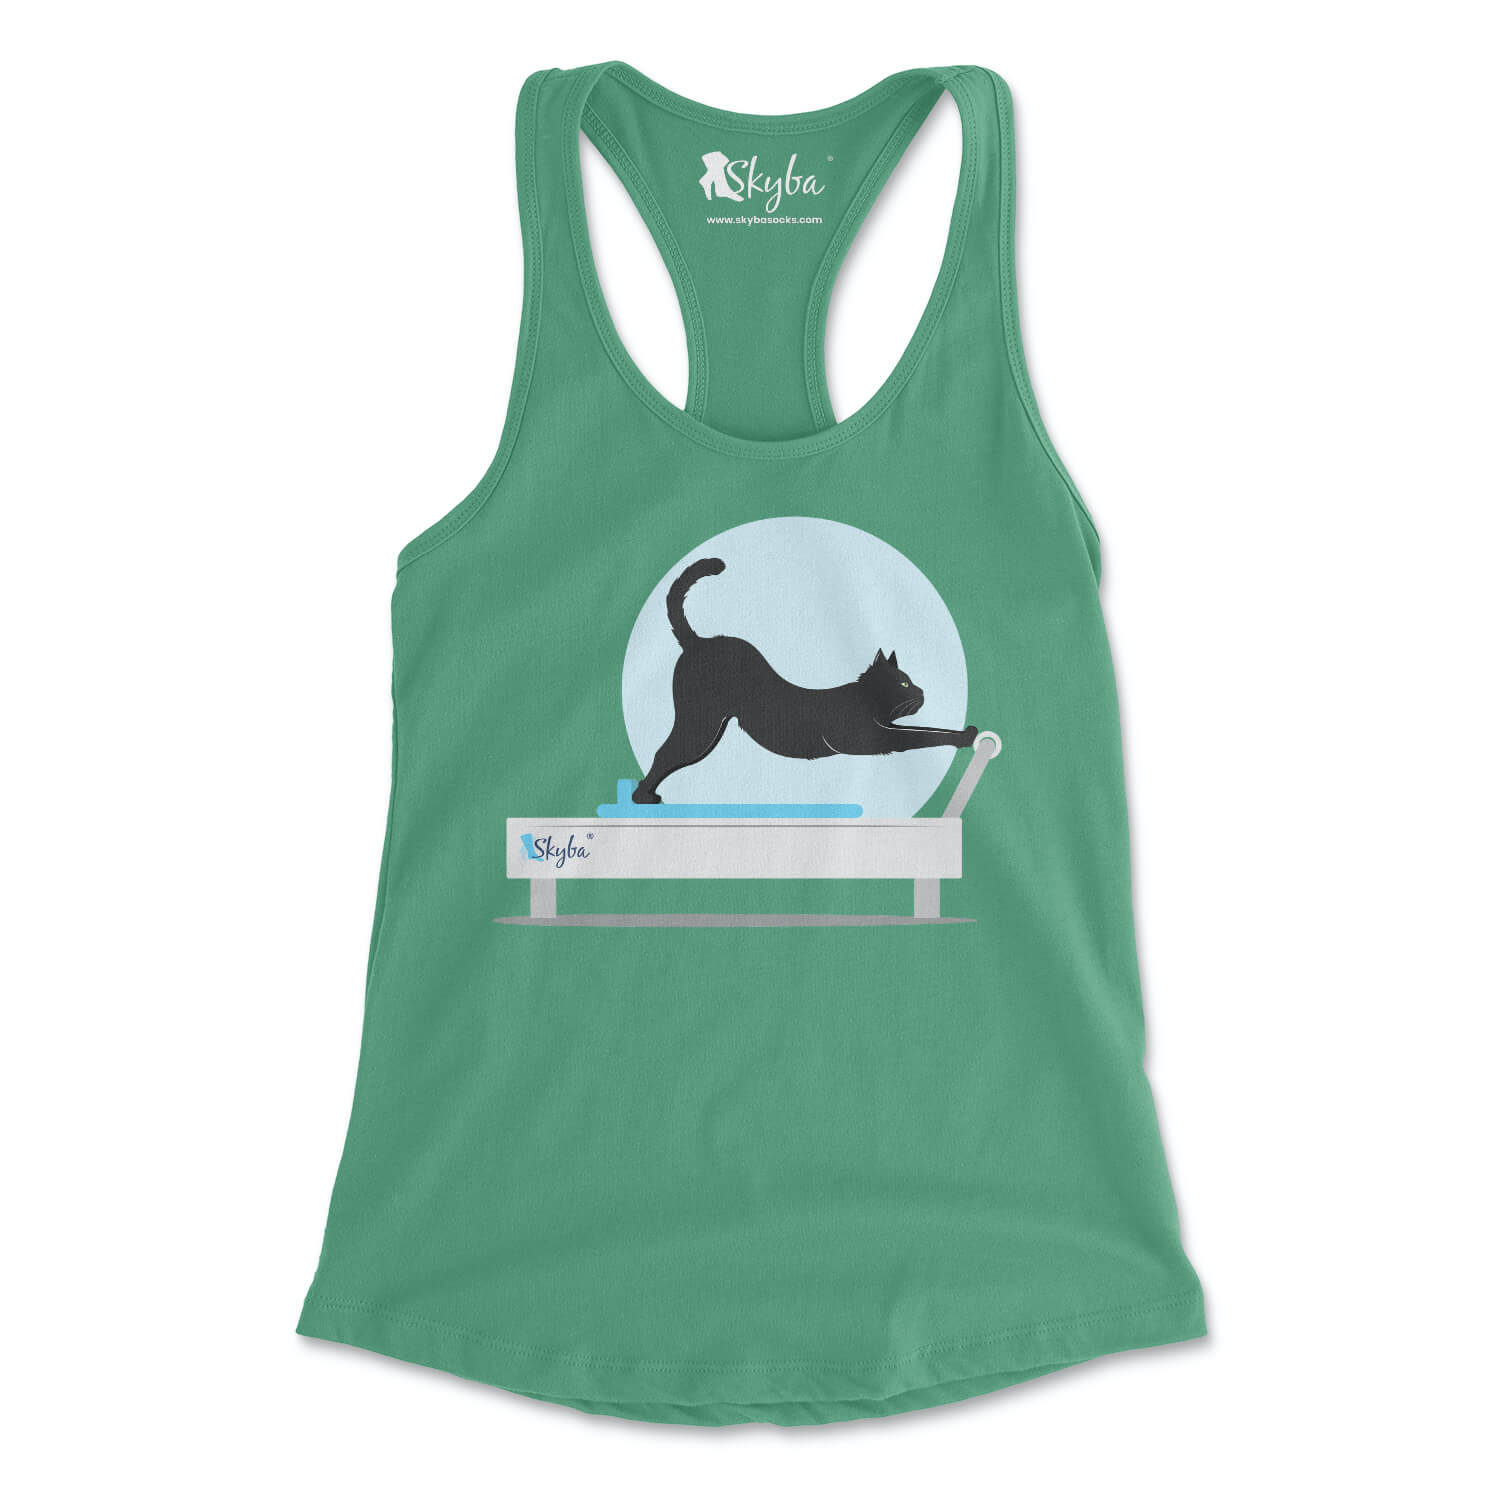 Stretching Cat on Reformer - Women's Slim Fit Tank Skyba Tank Top